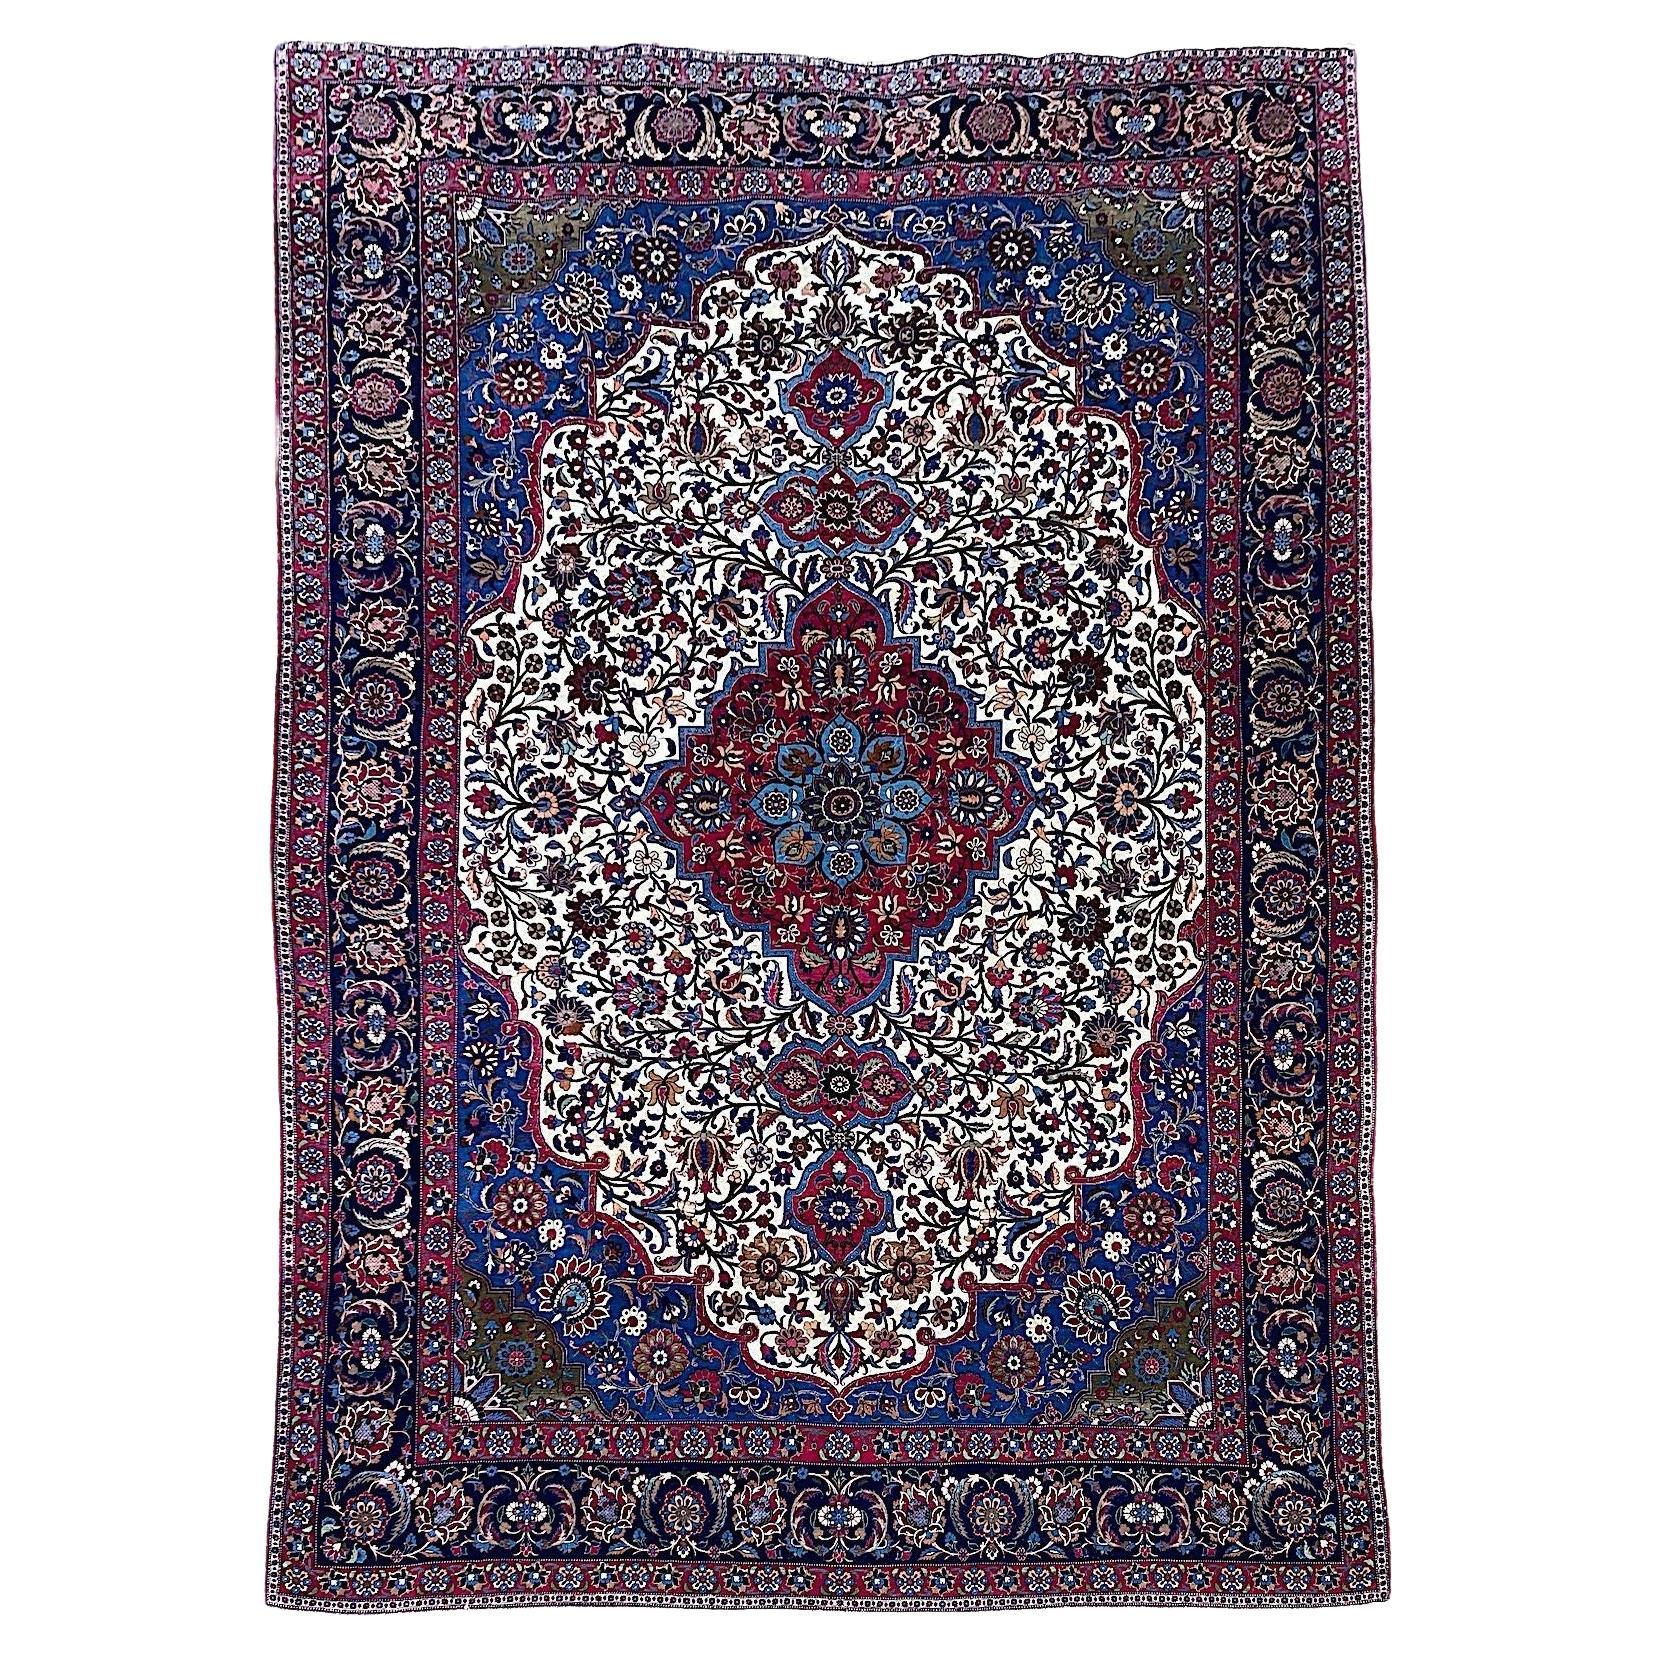 Antique Wool & Silk Isfahan Carpet 3.43m x 2.33m For Sale